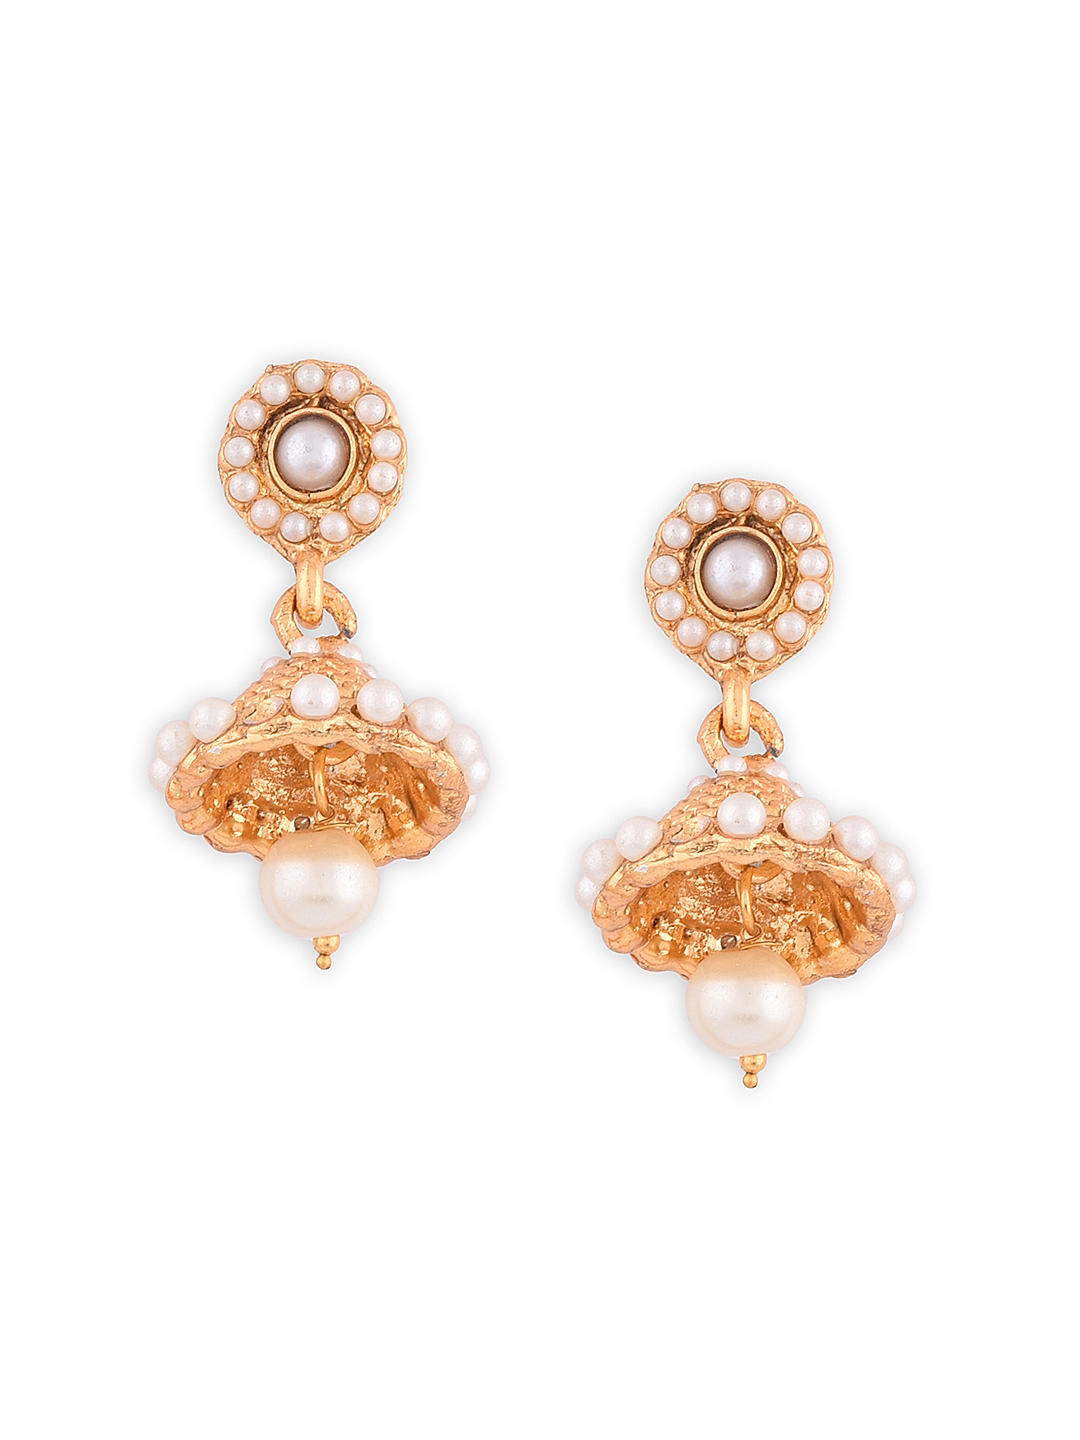 Buy Traditional South Indian 3 Layer Earrings for Bridal